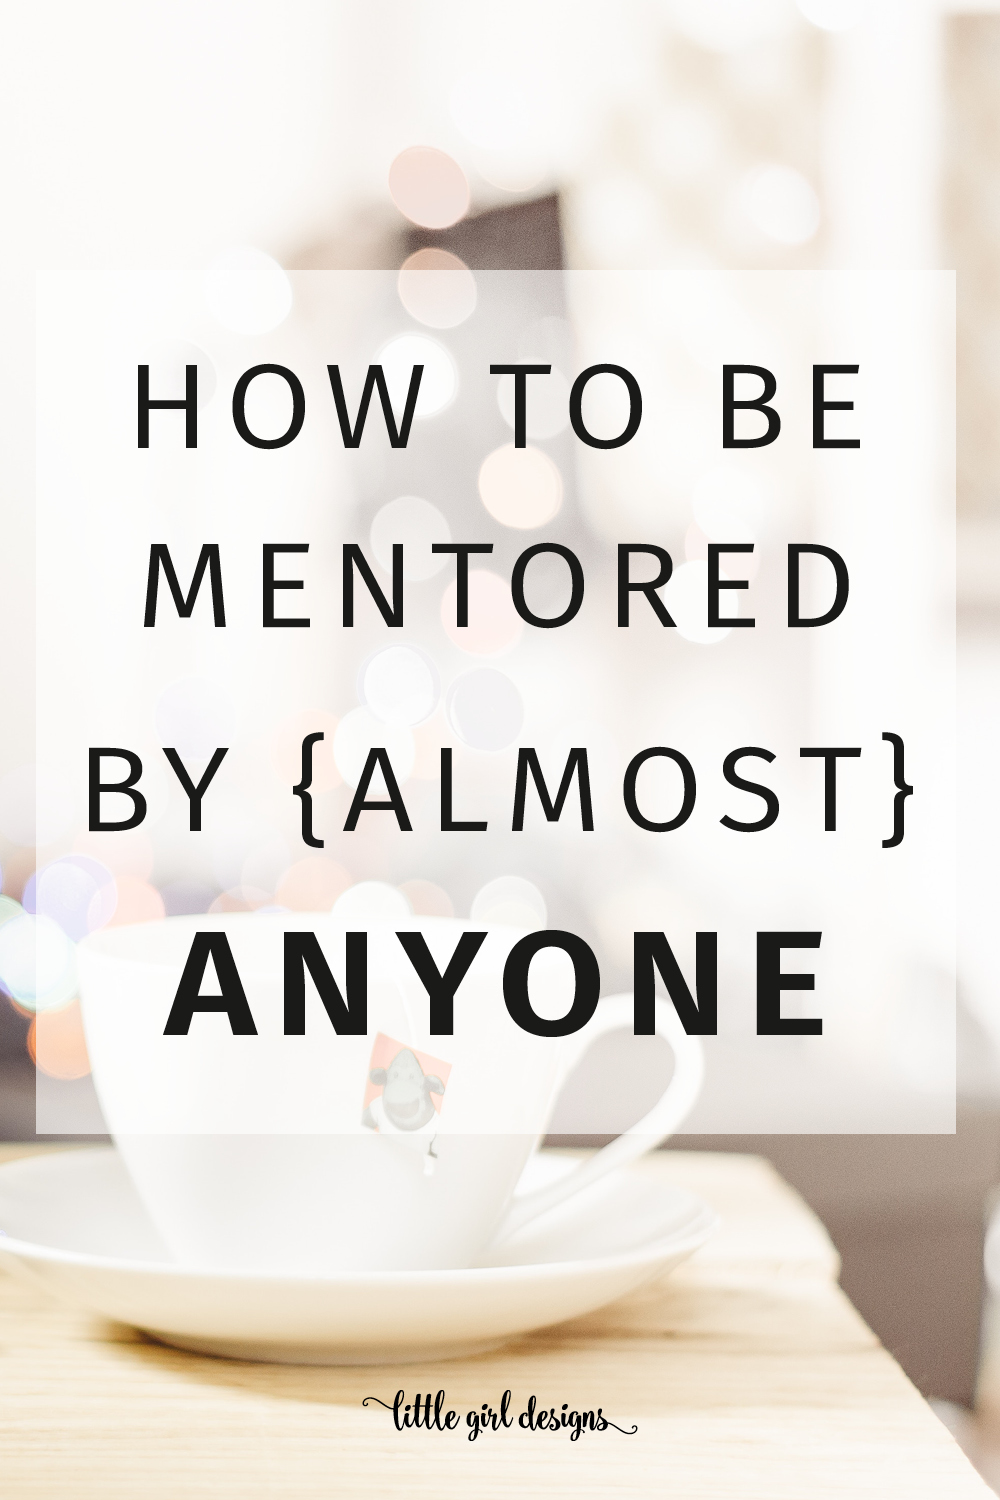 Mentoring is a great way to grow personally and professionally, but what if you don't know anyone who can mentor you? No worries, you can still be mentored by some of the top leaders in the world. Seriously. This is how I do it. :) (P.S. This is a really awesome idea for introverts!)